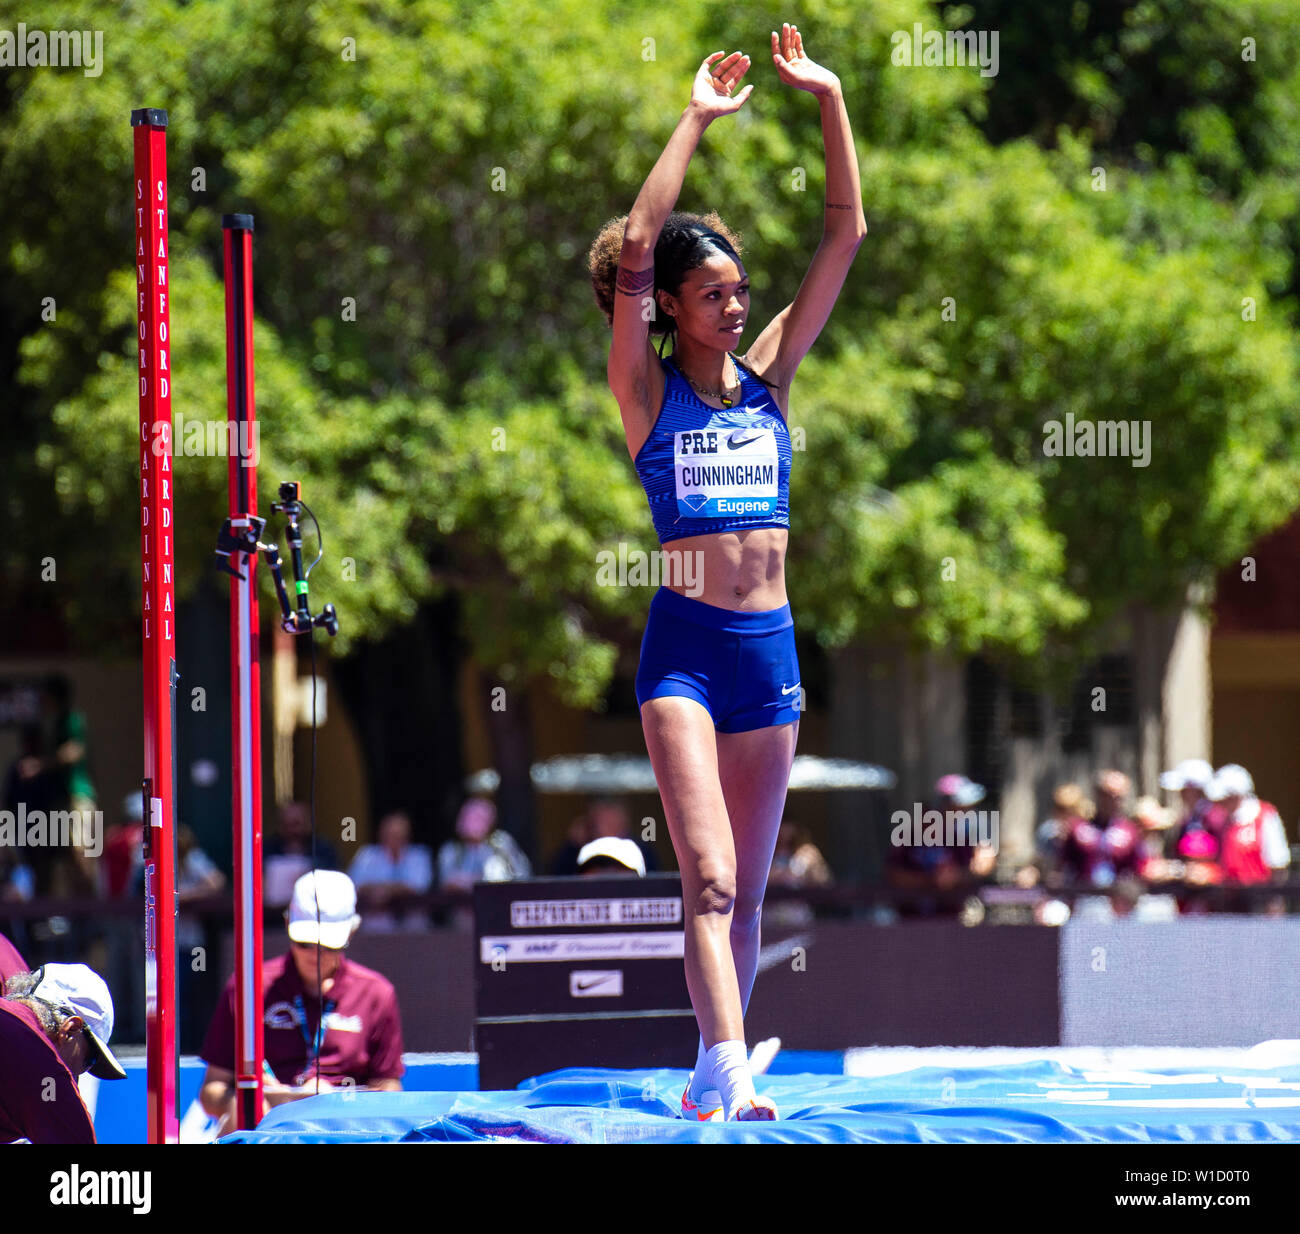 Stanford, CA. 30th June, 2019. Vashti Cunningham waves to the fans after her last attempt settles for 2nd place. Vashti set a personal best of 6-6 3/4 at the Women's High Jump during the Nike Prefontaine Classic at Stanford University Palo Alto, CA. Thurman James/CSM/Alamy Live News Stock Photo